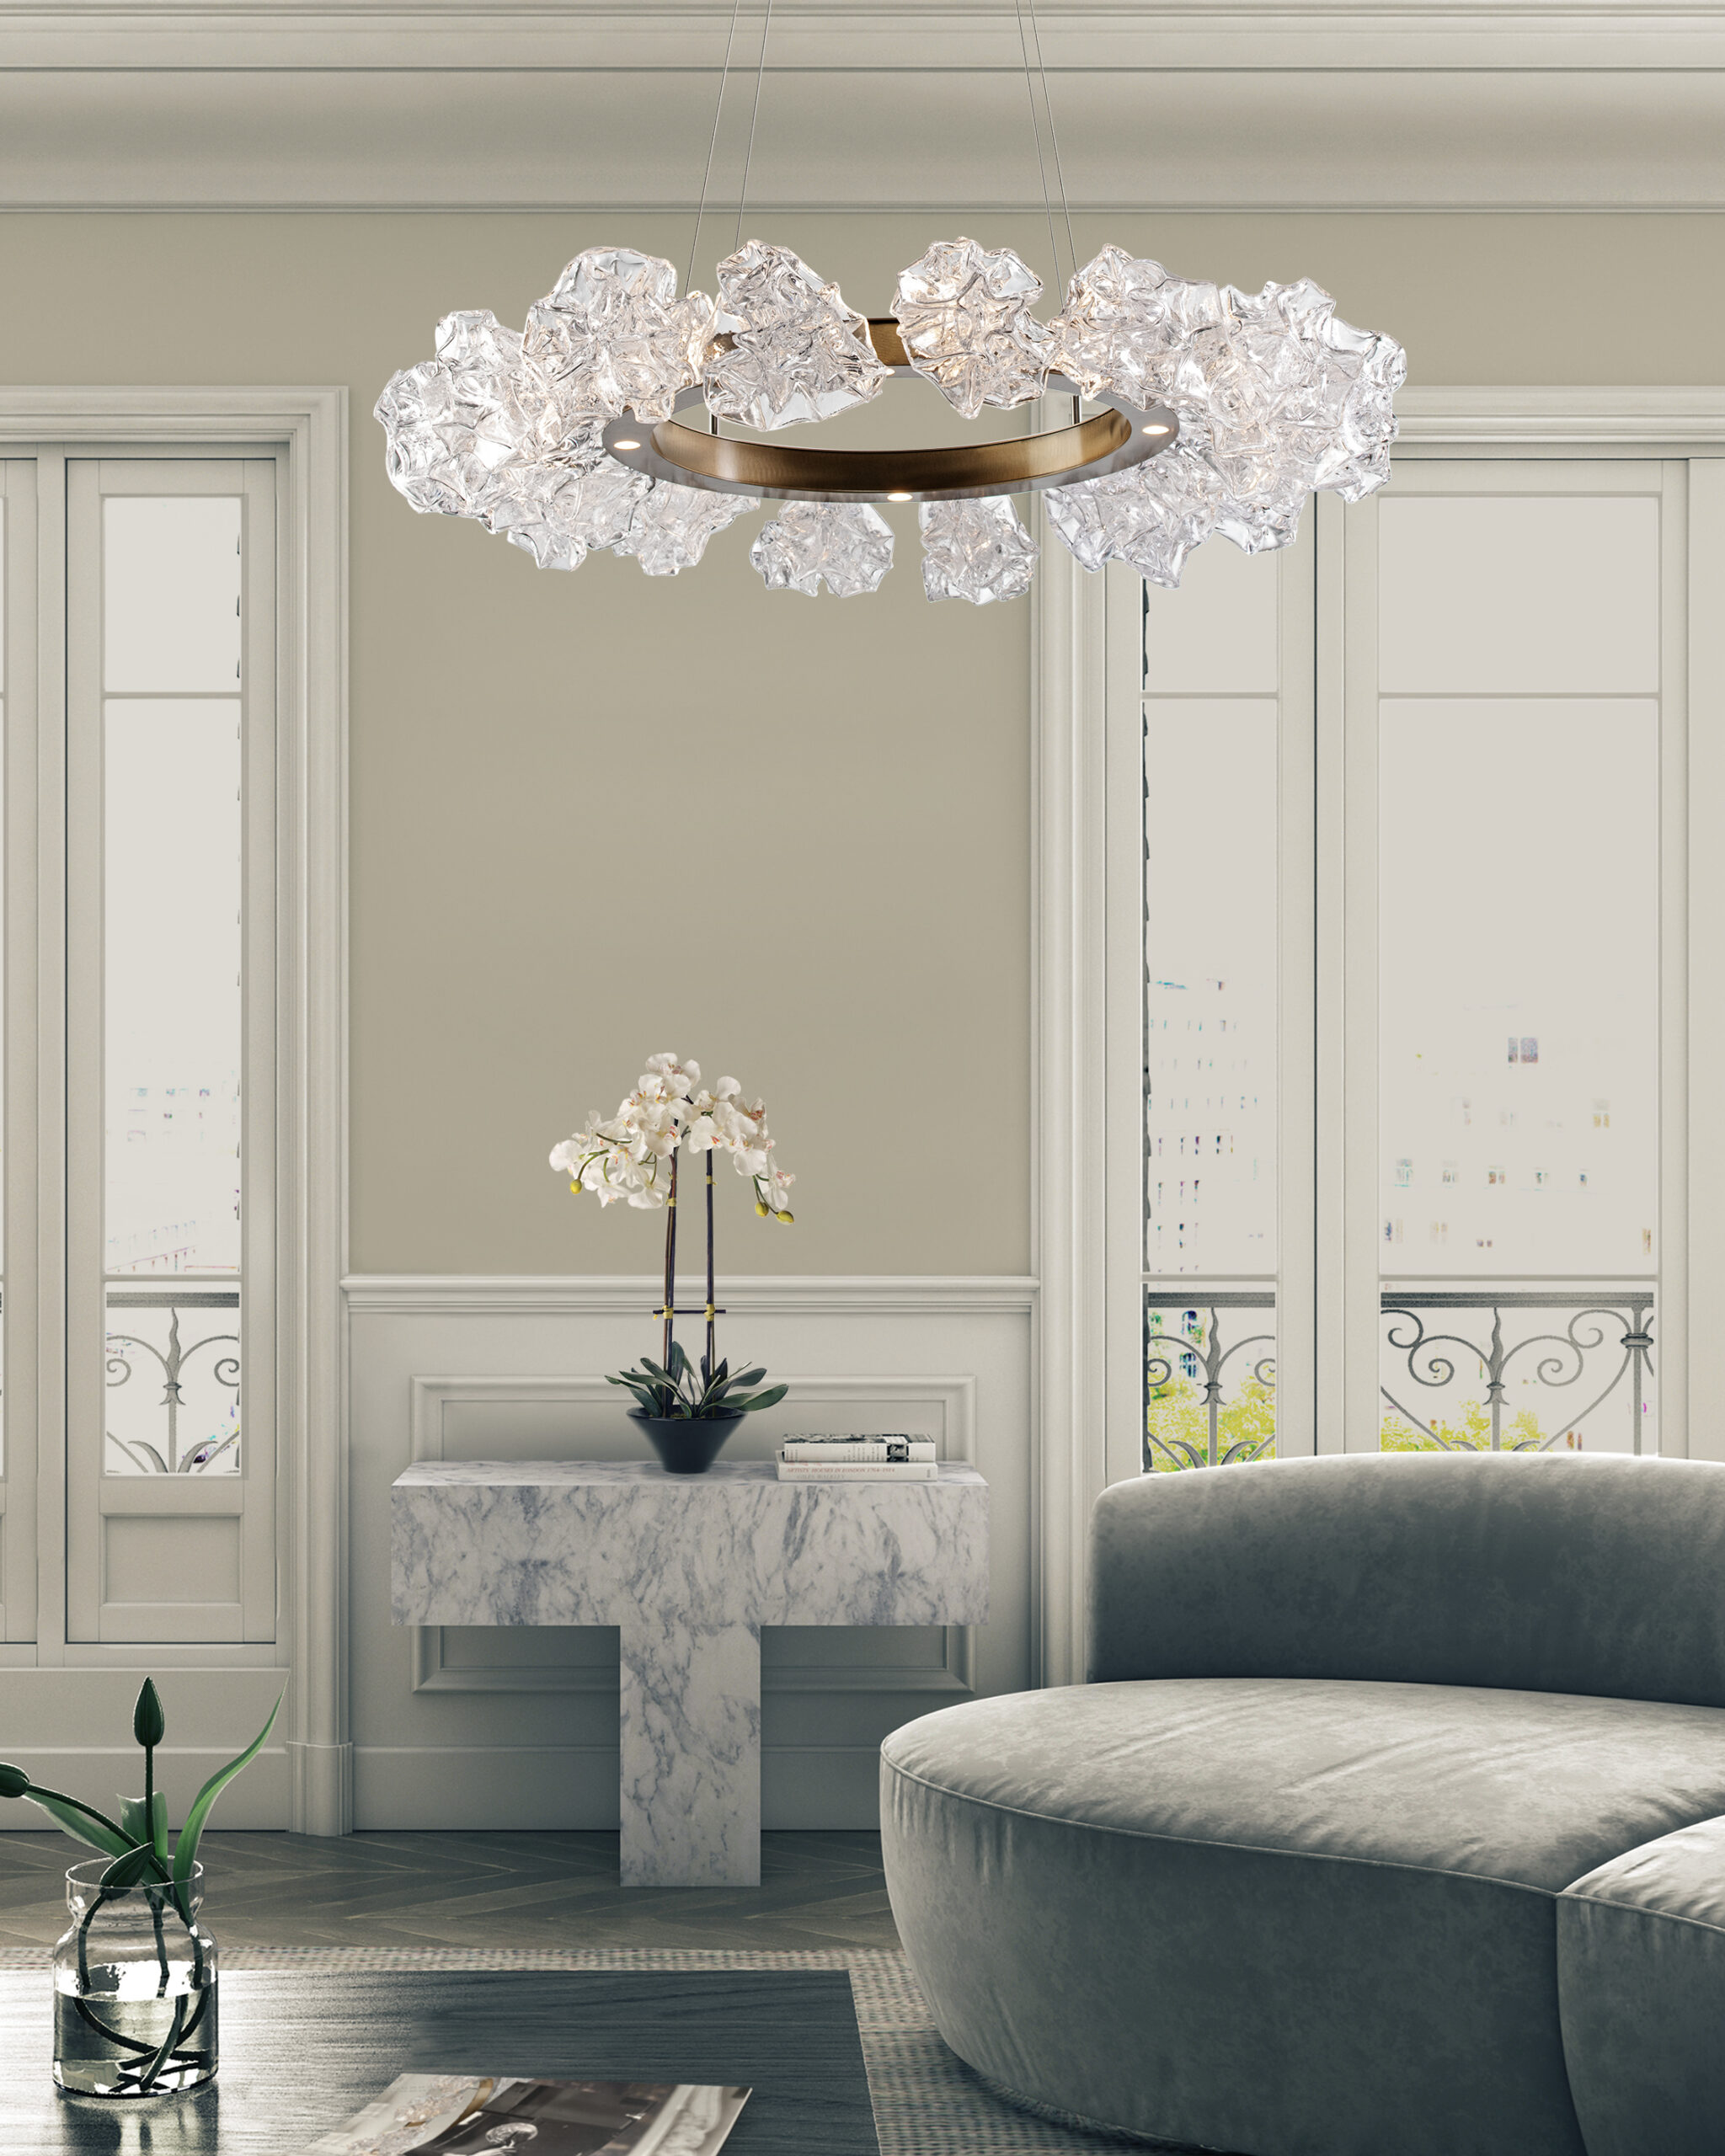 Blossom_ring-chandelier_CHB0059-36-RB-BC_living-room_oil-rubbed-bronze_clear-blossom-shaped-blown-glass-shades_context